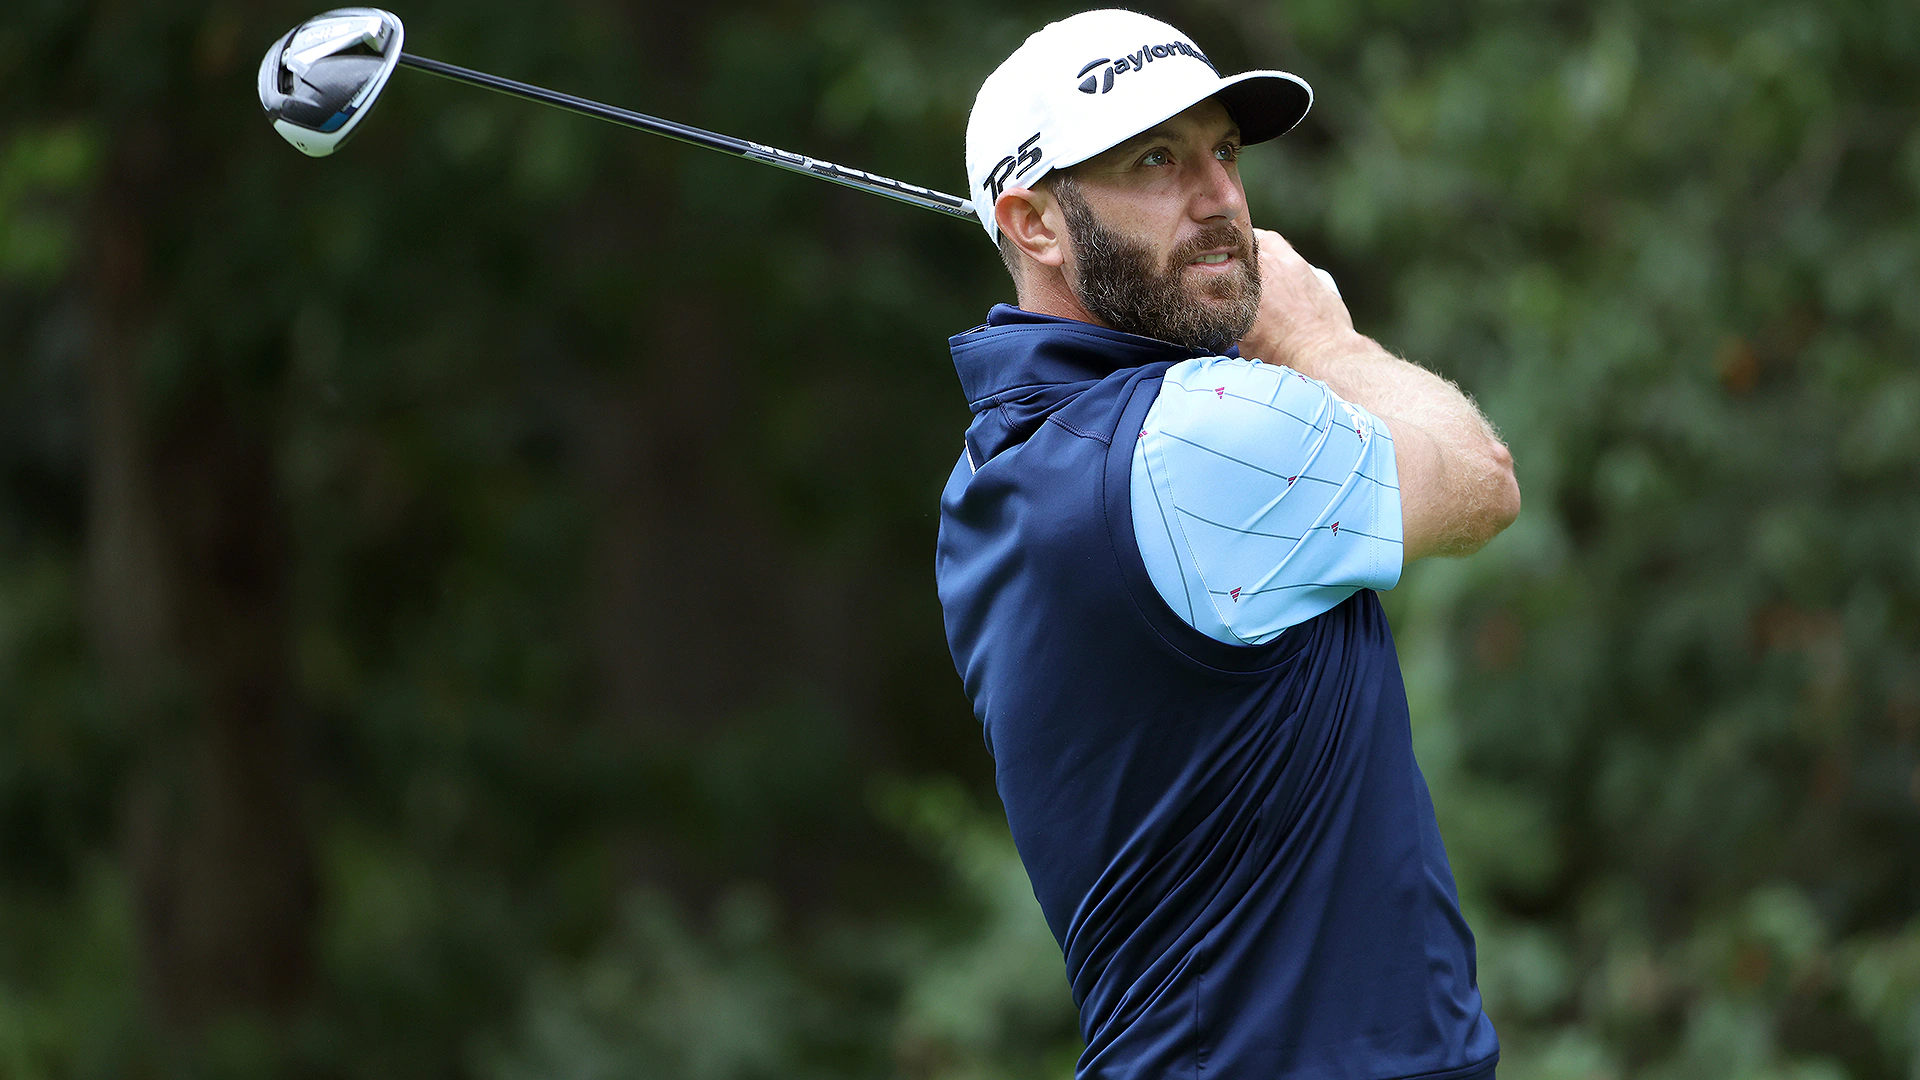 World No. 1 Dustin Johnson out of second event after COVID-19 diagnosis